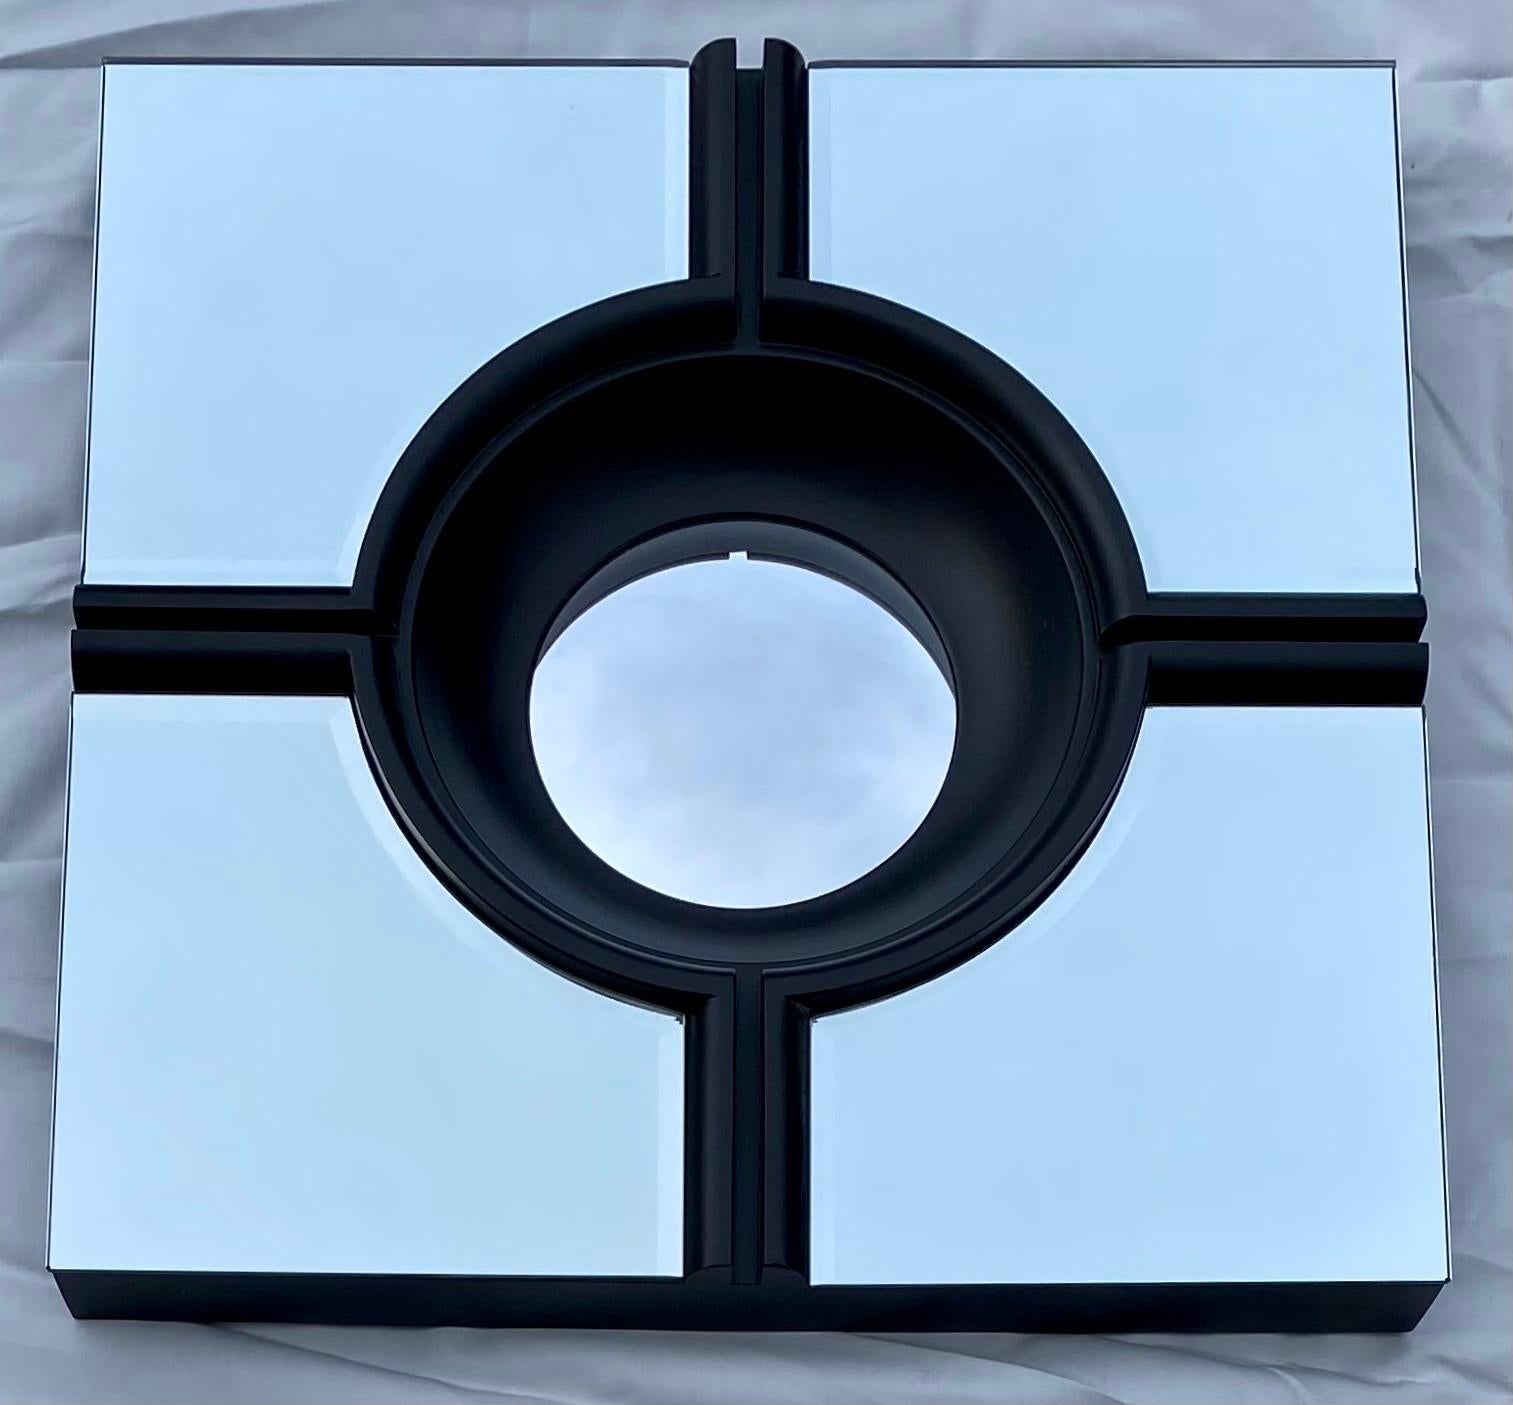 Hollywood Regency style set of four square mirror panels with beveled edges and round bullseye centers. This architectural set of matte black mirrors can be hung in a variety of configurations to fit your space. Each mirror attaches to the wall with